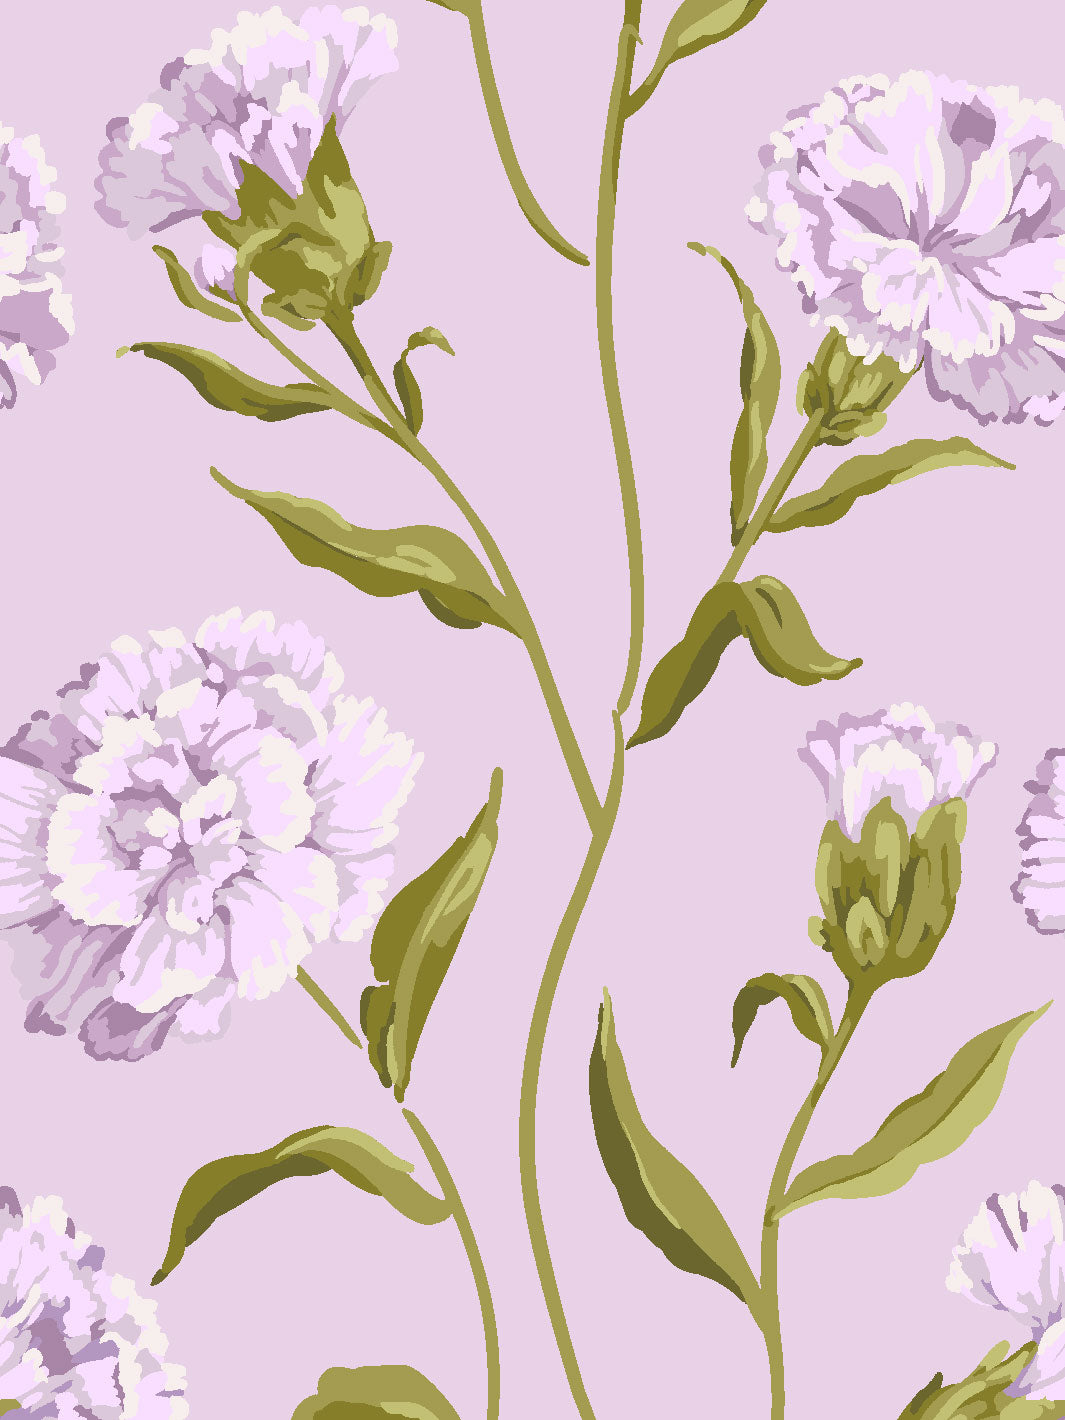 'Townhouse' Wallpaper by Sarah Jessica Parker - Heliotrope on Lavender